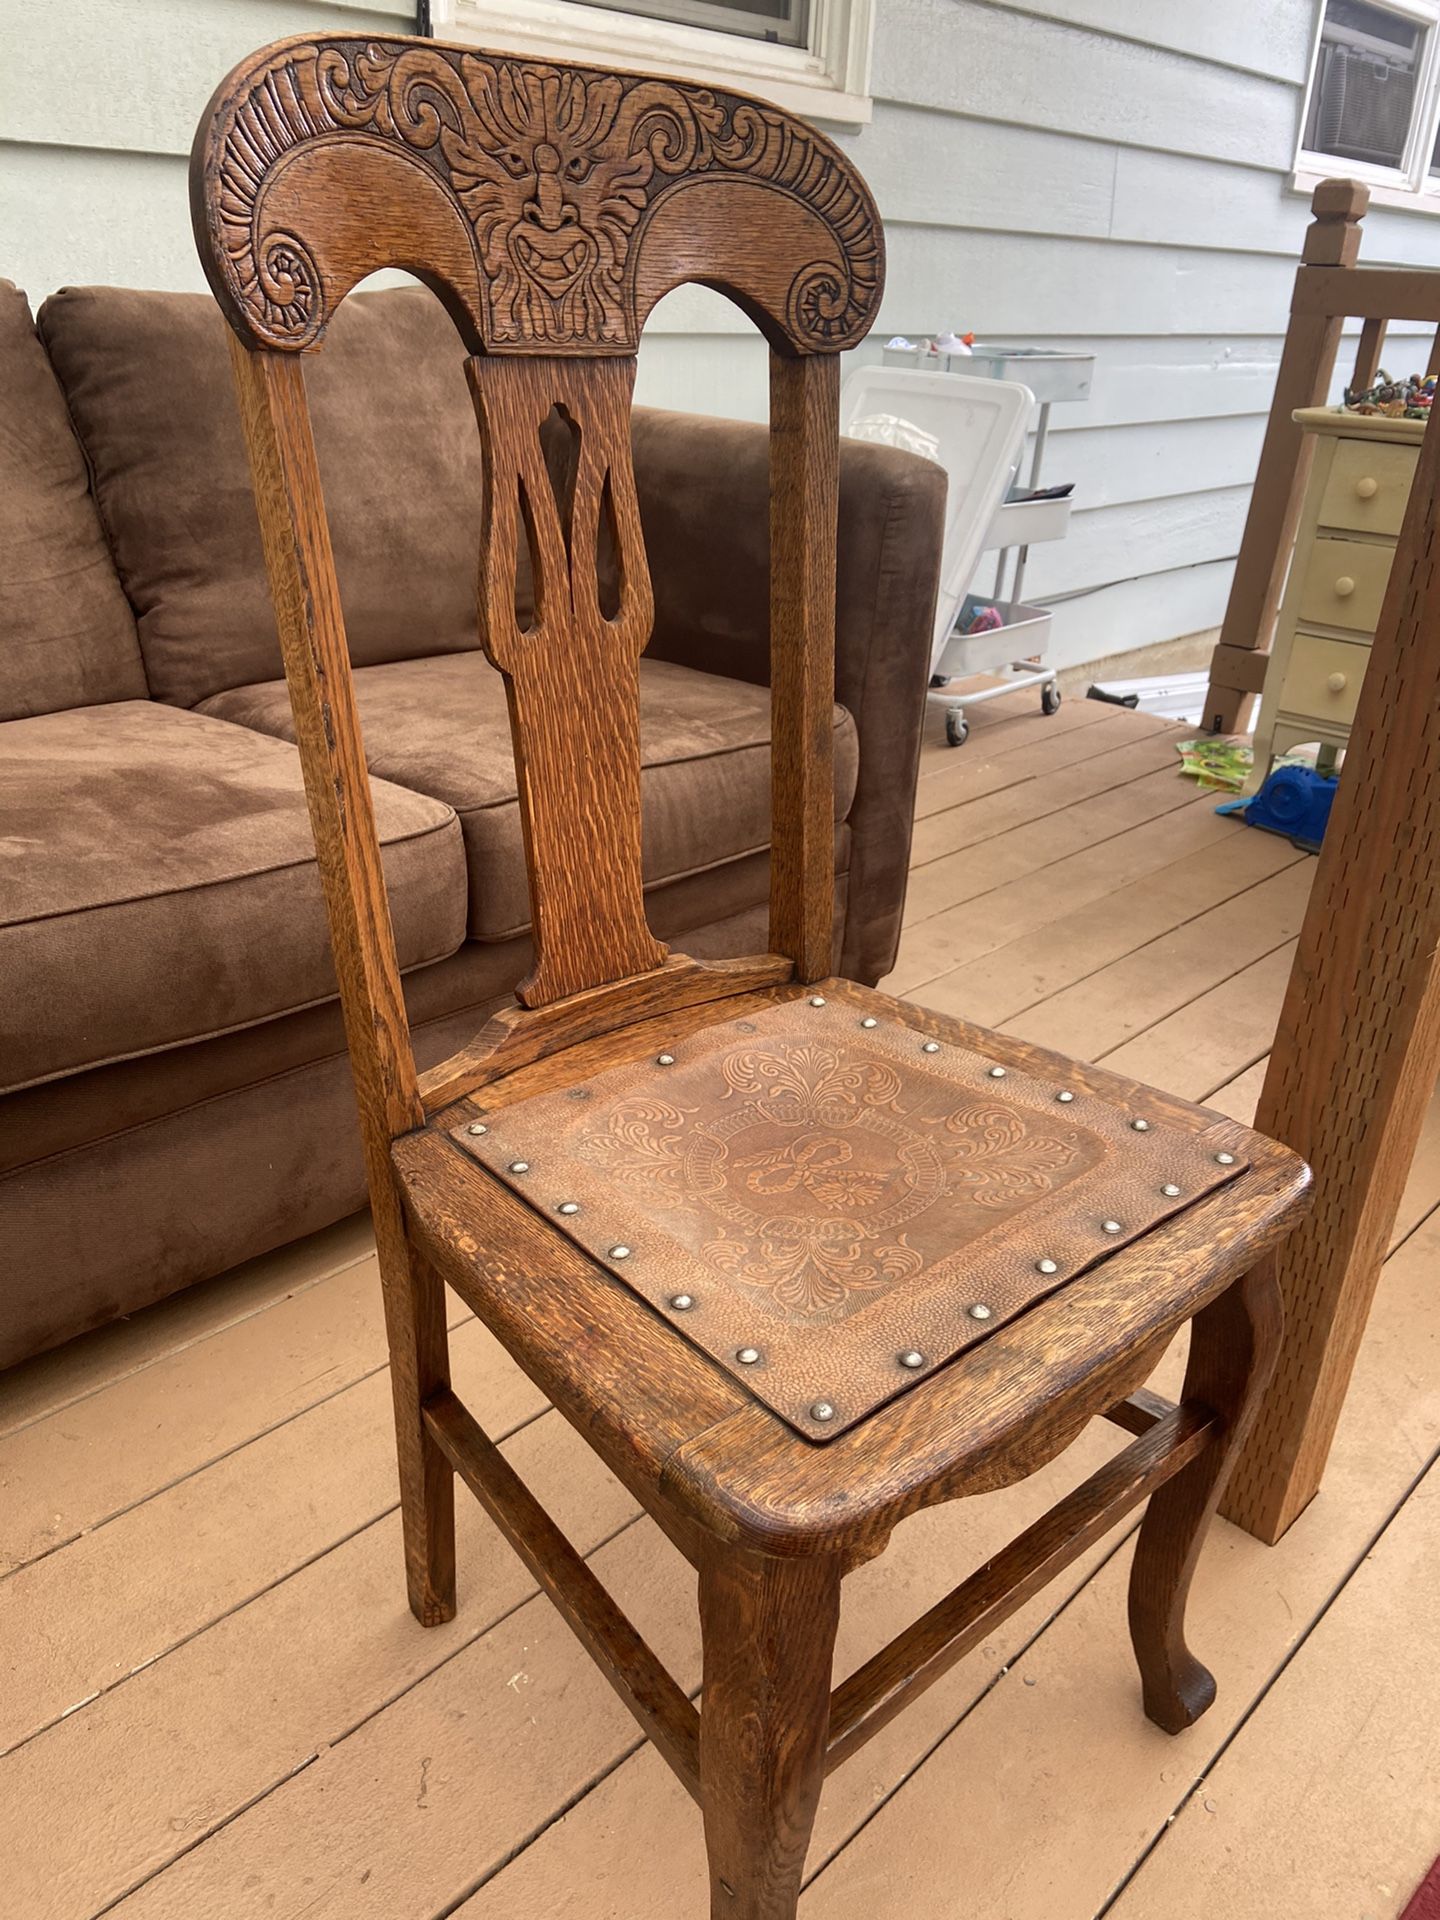 antique “wind god” chair from 1910-1920